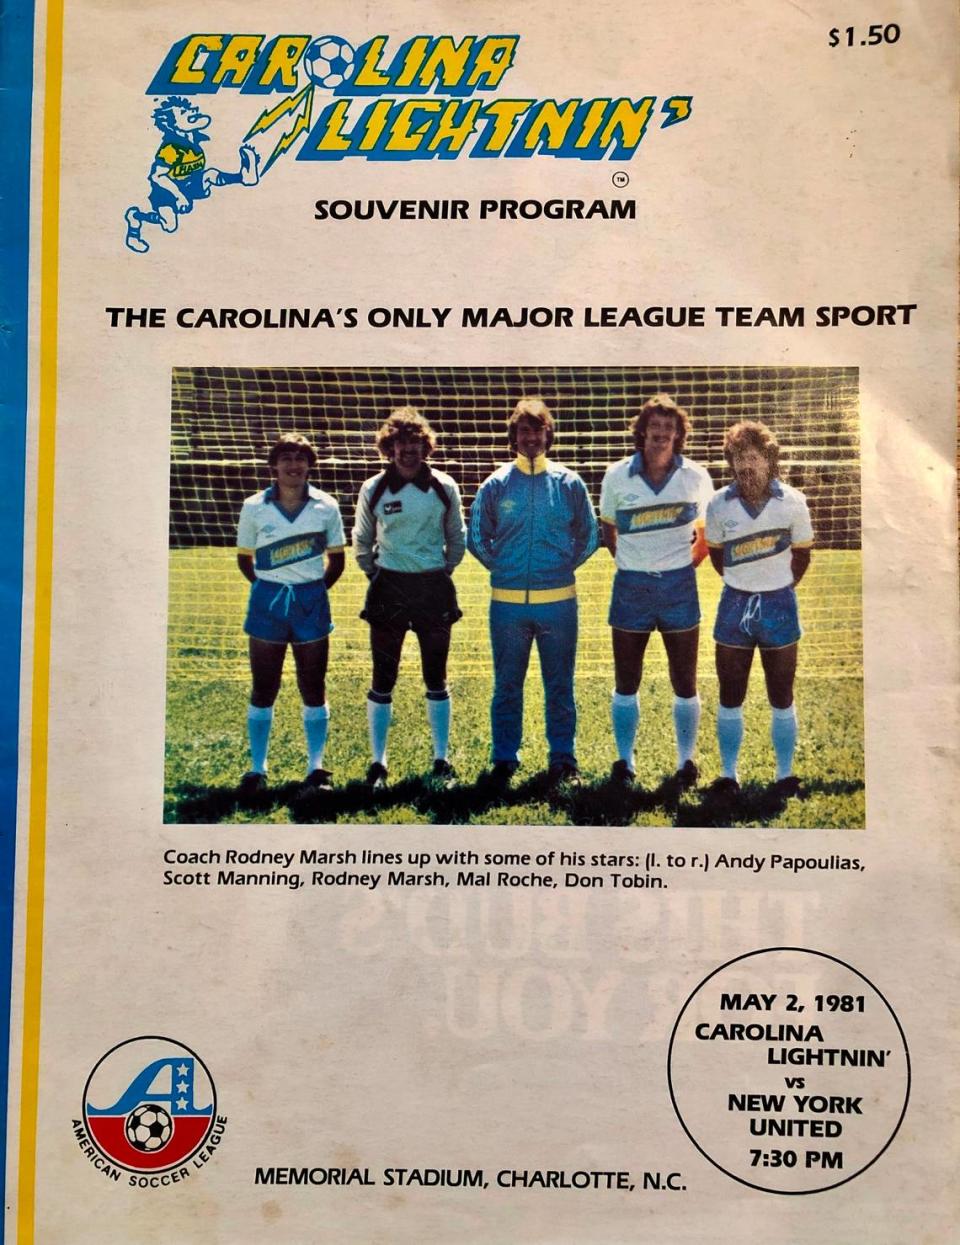 The first game program for the Carolina Lightnin’ cost $1.50 in 1981. The team would go on to win the league championship in its first season under head coach Rodney Marsh and team owner Bob Benson, and gave away an airplane along the way.